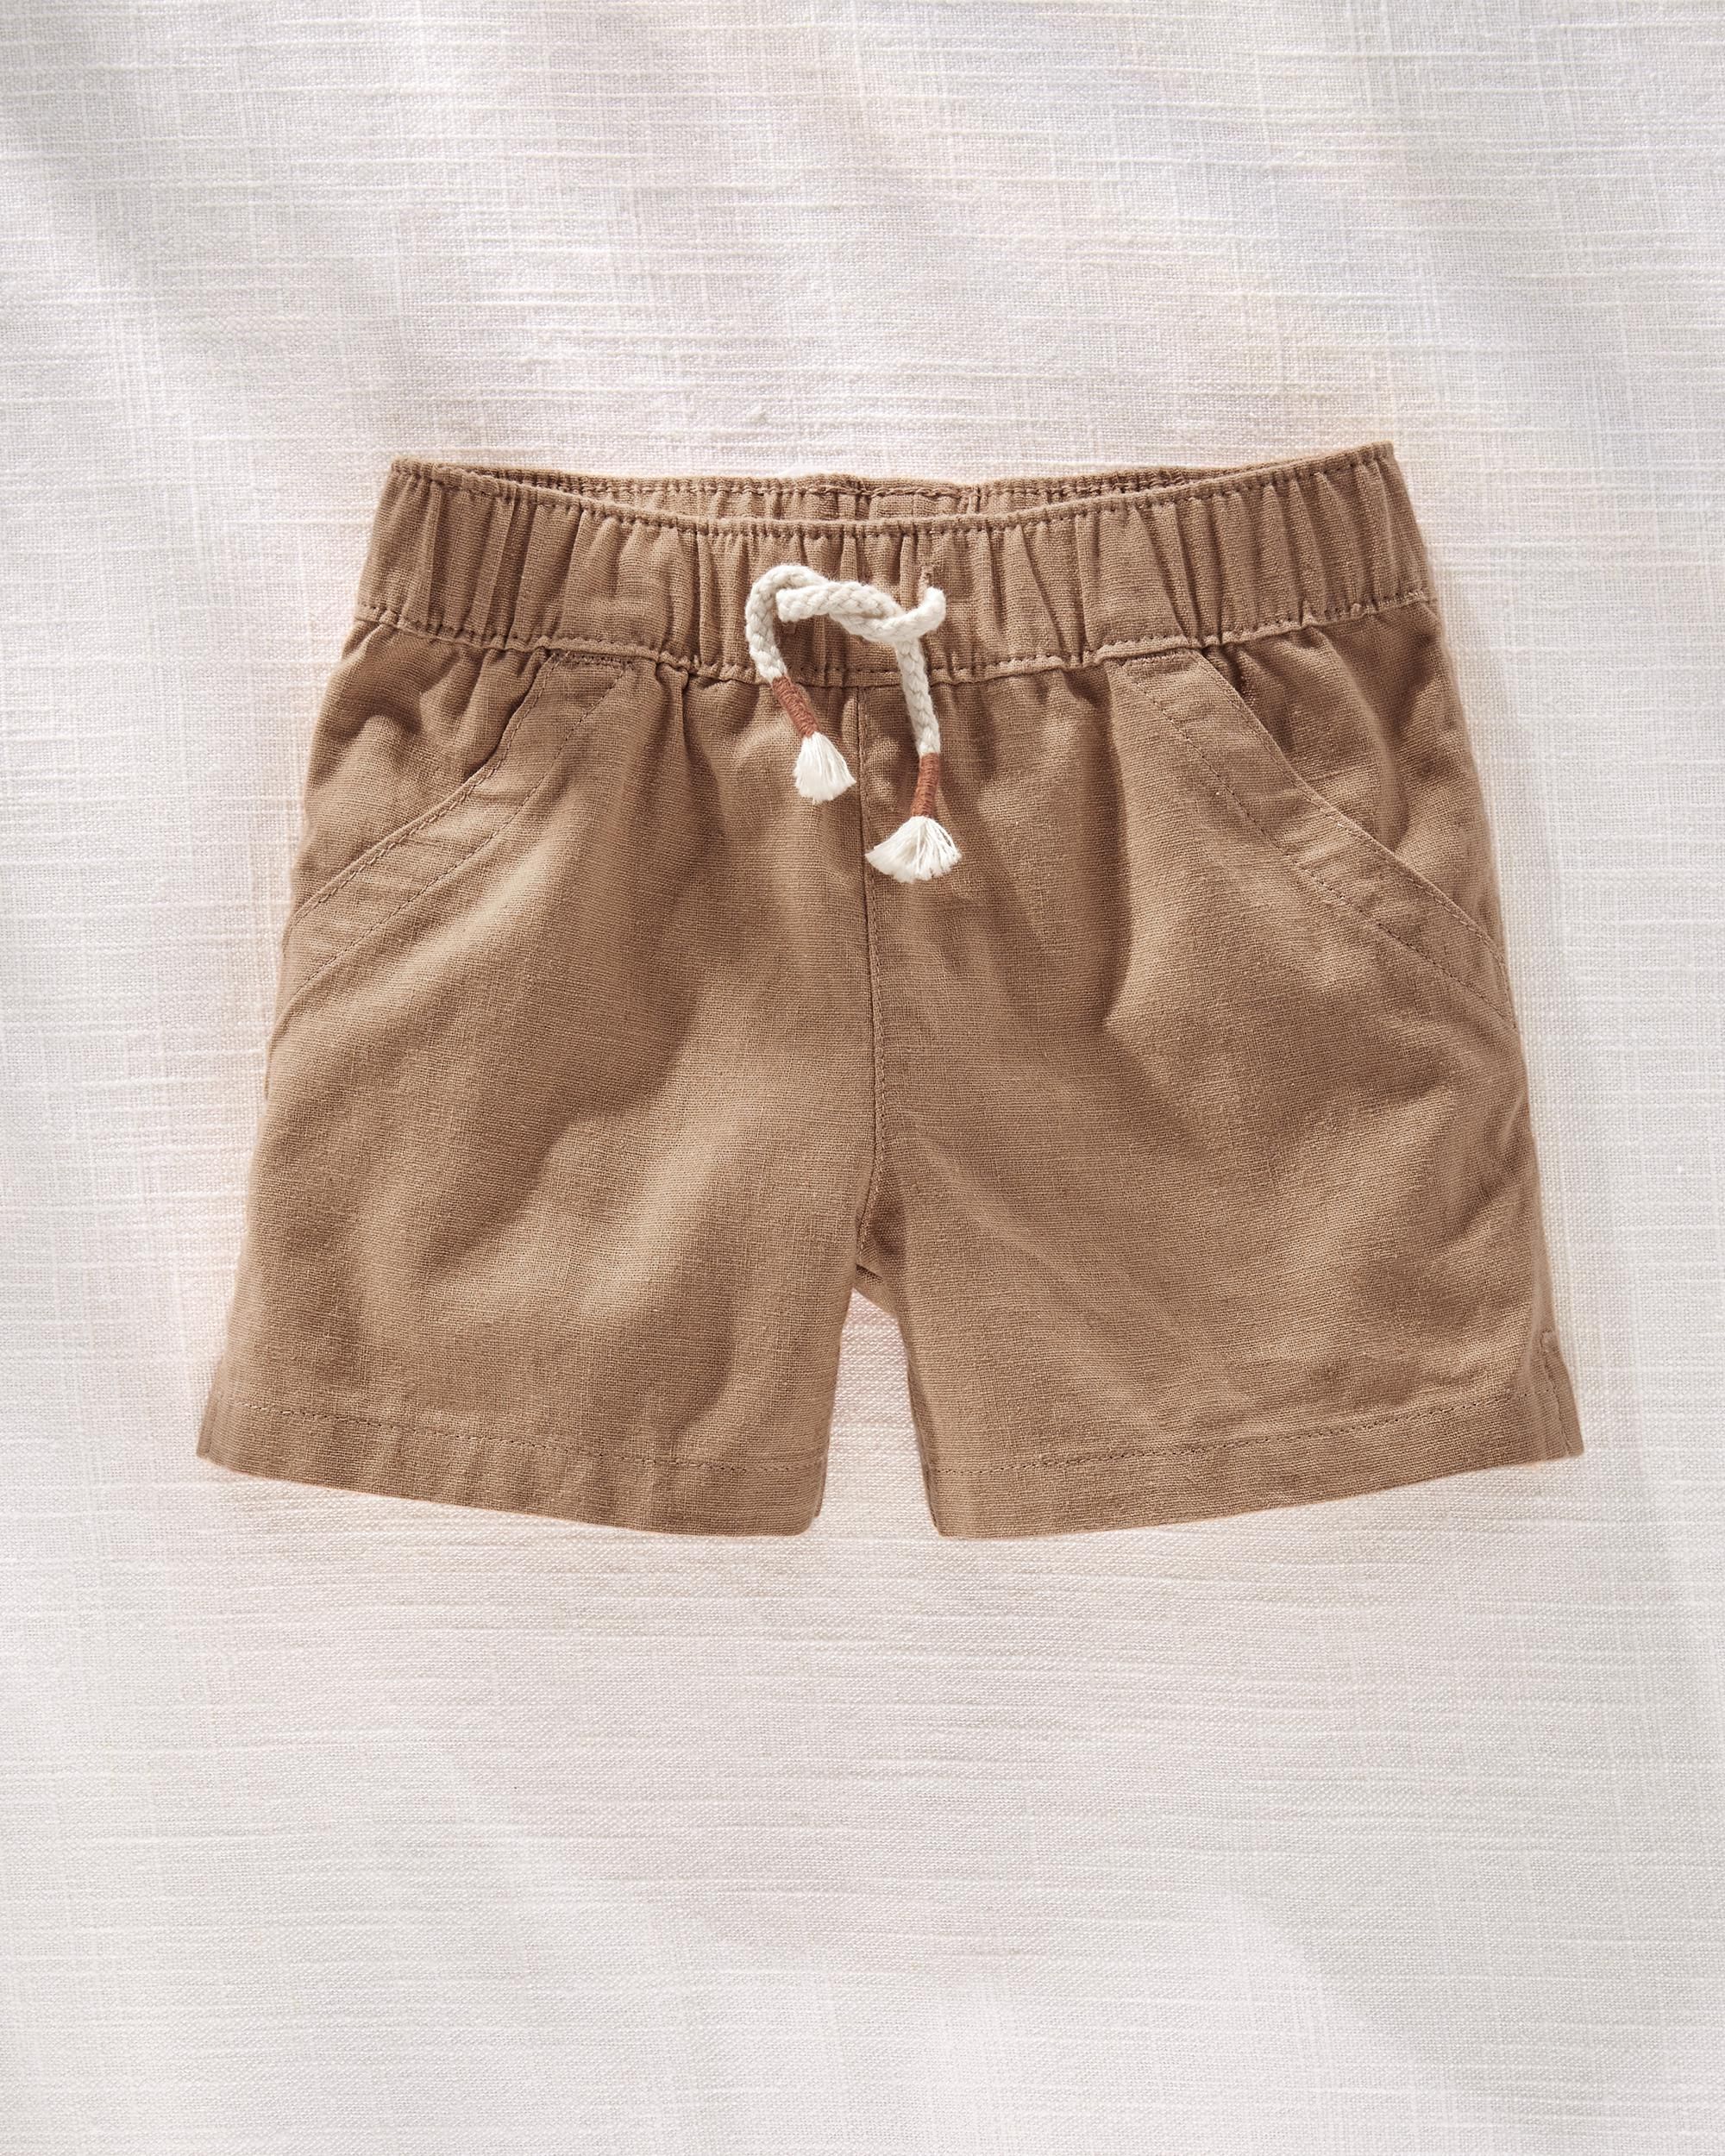 Baby Hilary Duff Pull-On Linen Shorts | Carter's